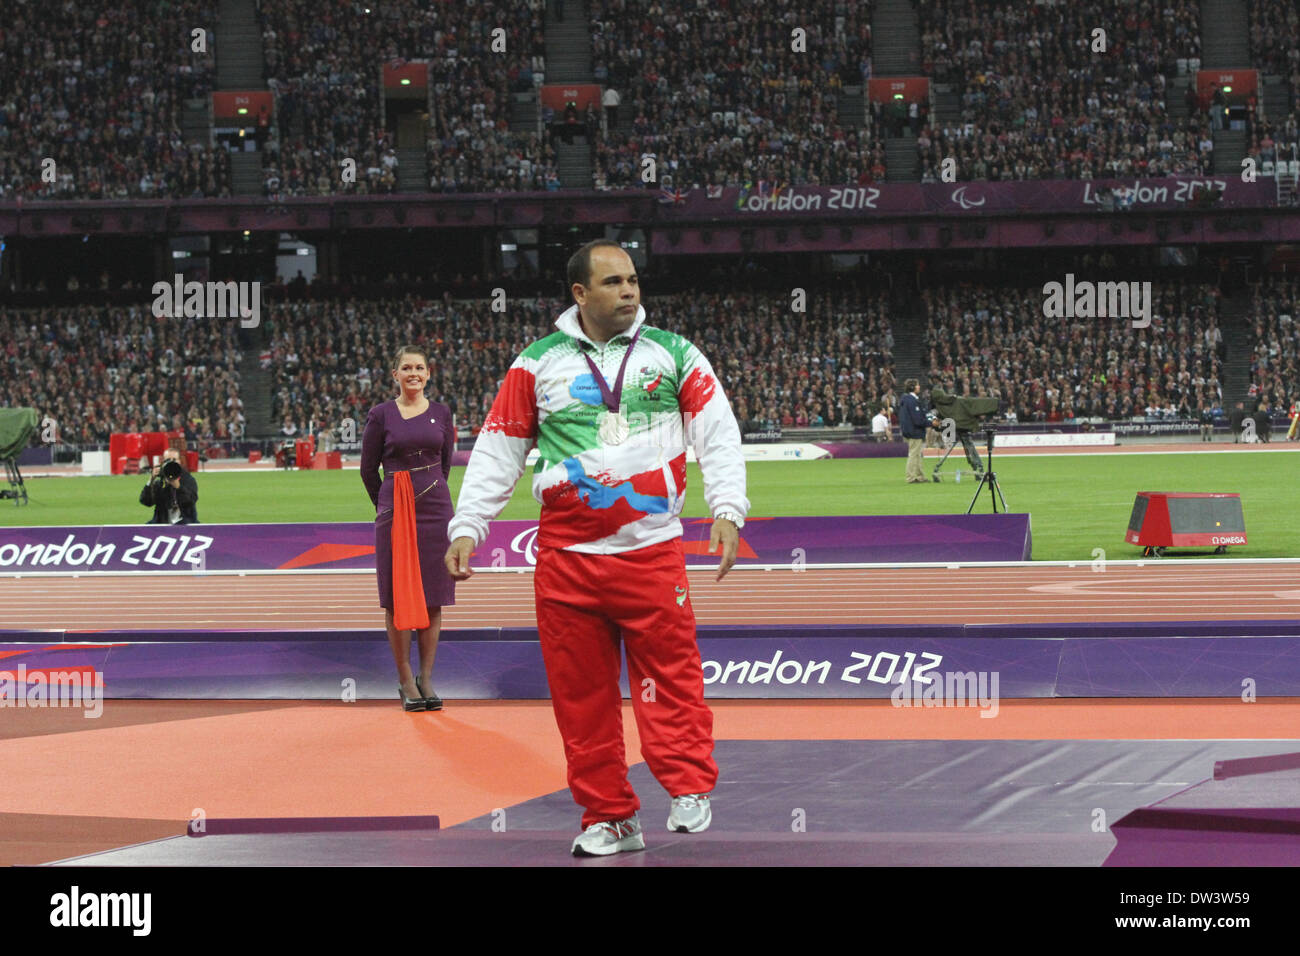 Mehrdad KARAM ZADEH (Iran) 2nd in the Men's Discus Throw - F42 at the London 2012 Paralympic games Stock Photo